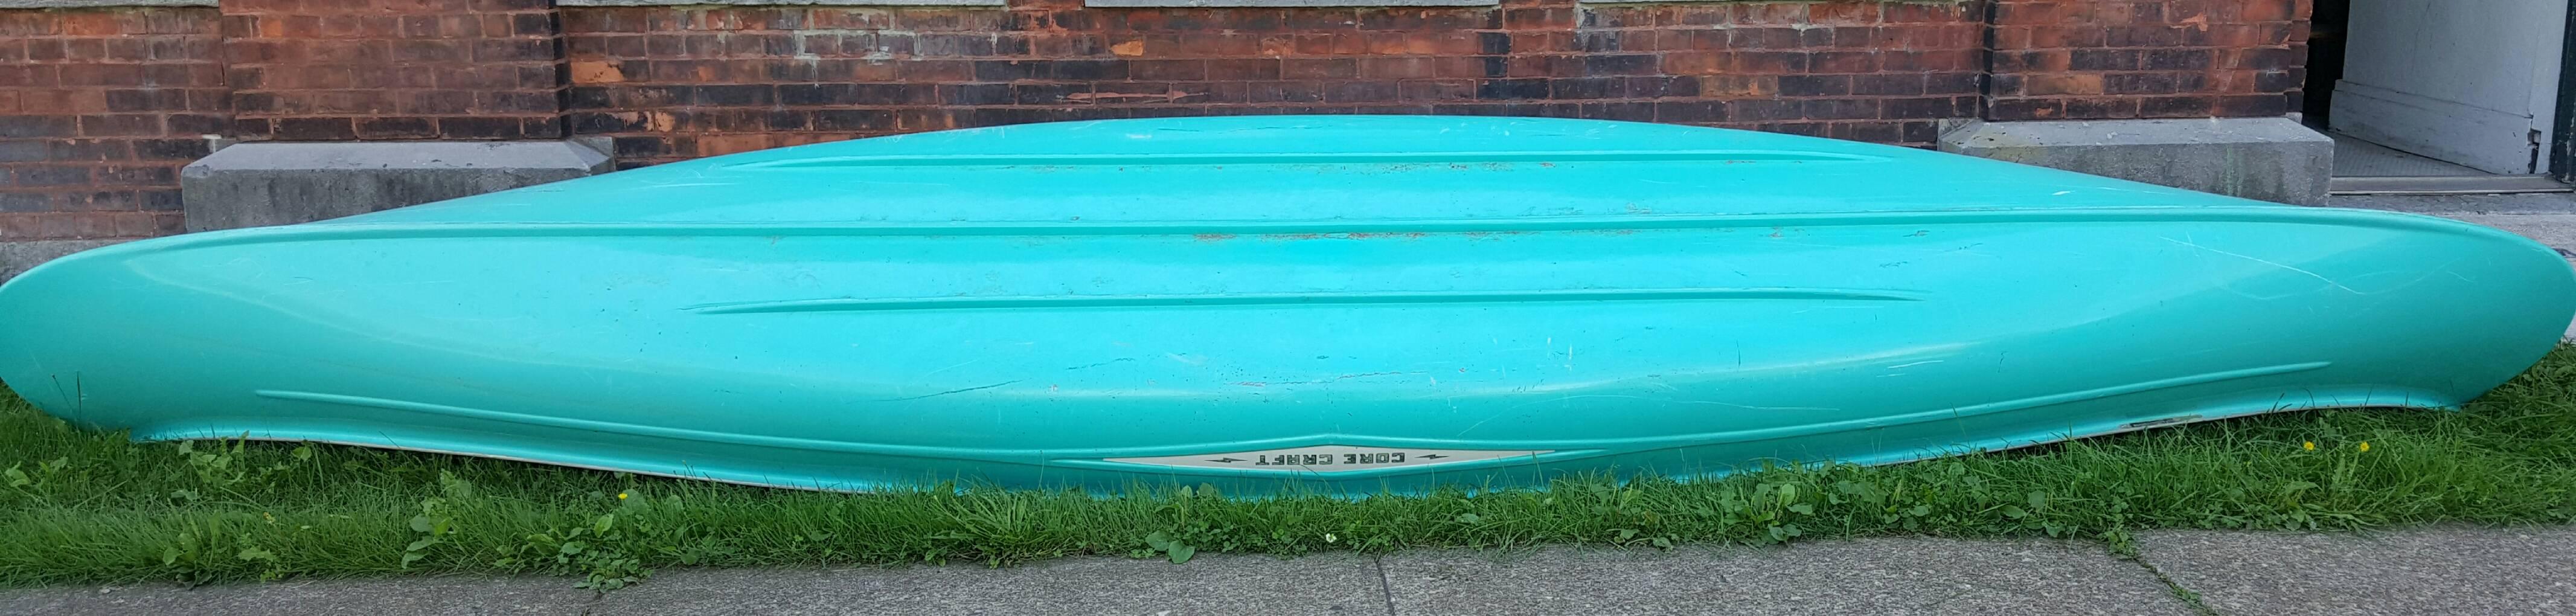 core craft canoe for sale